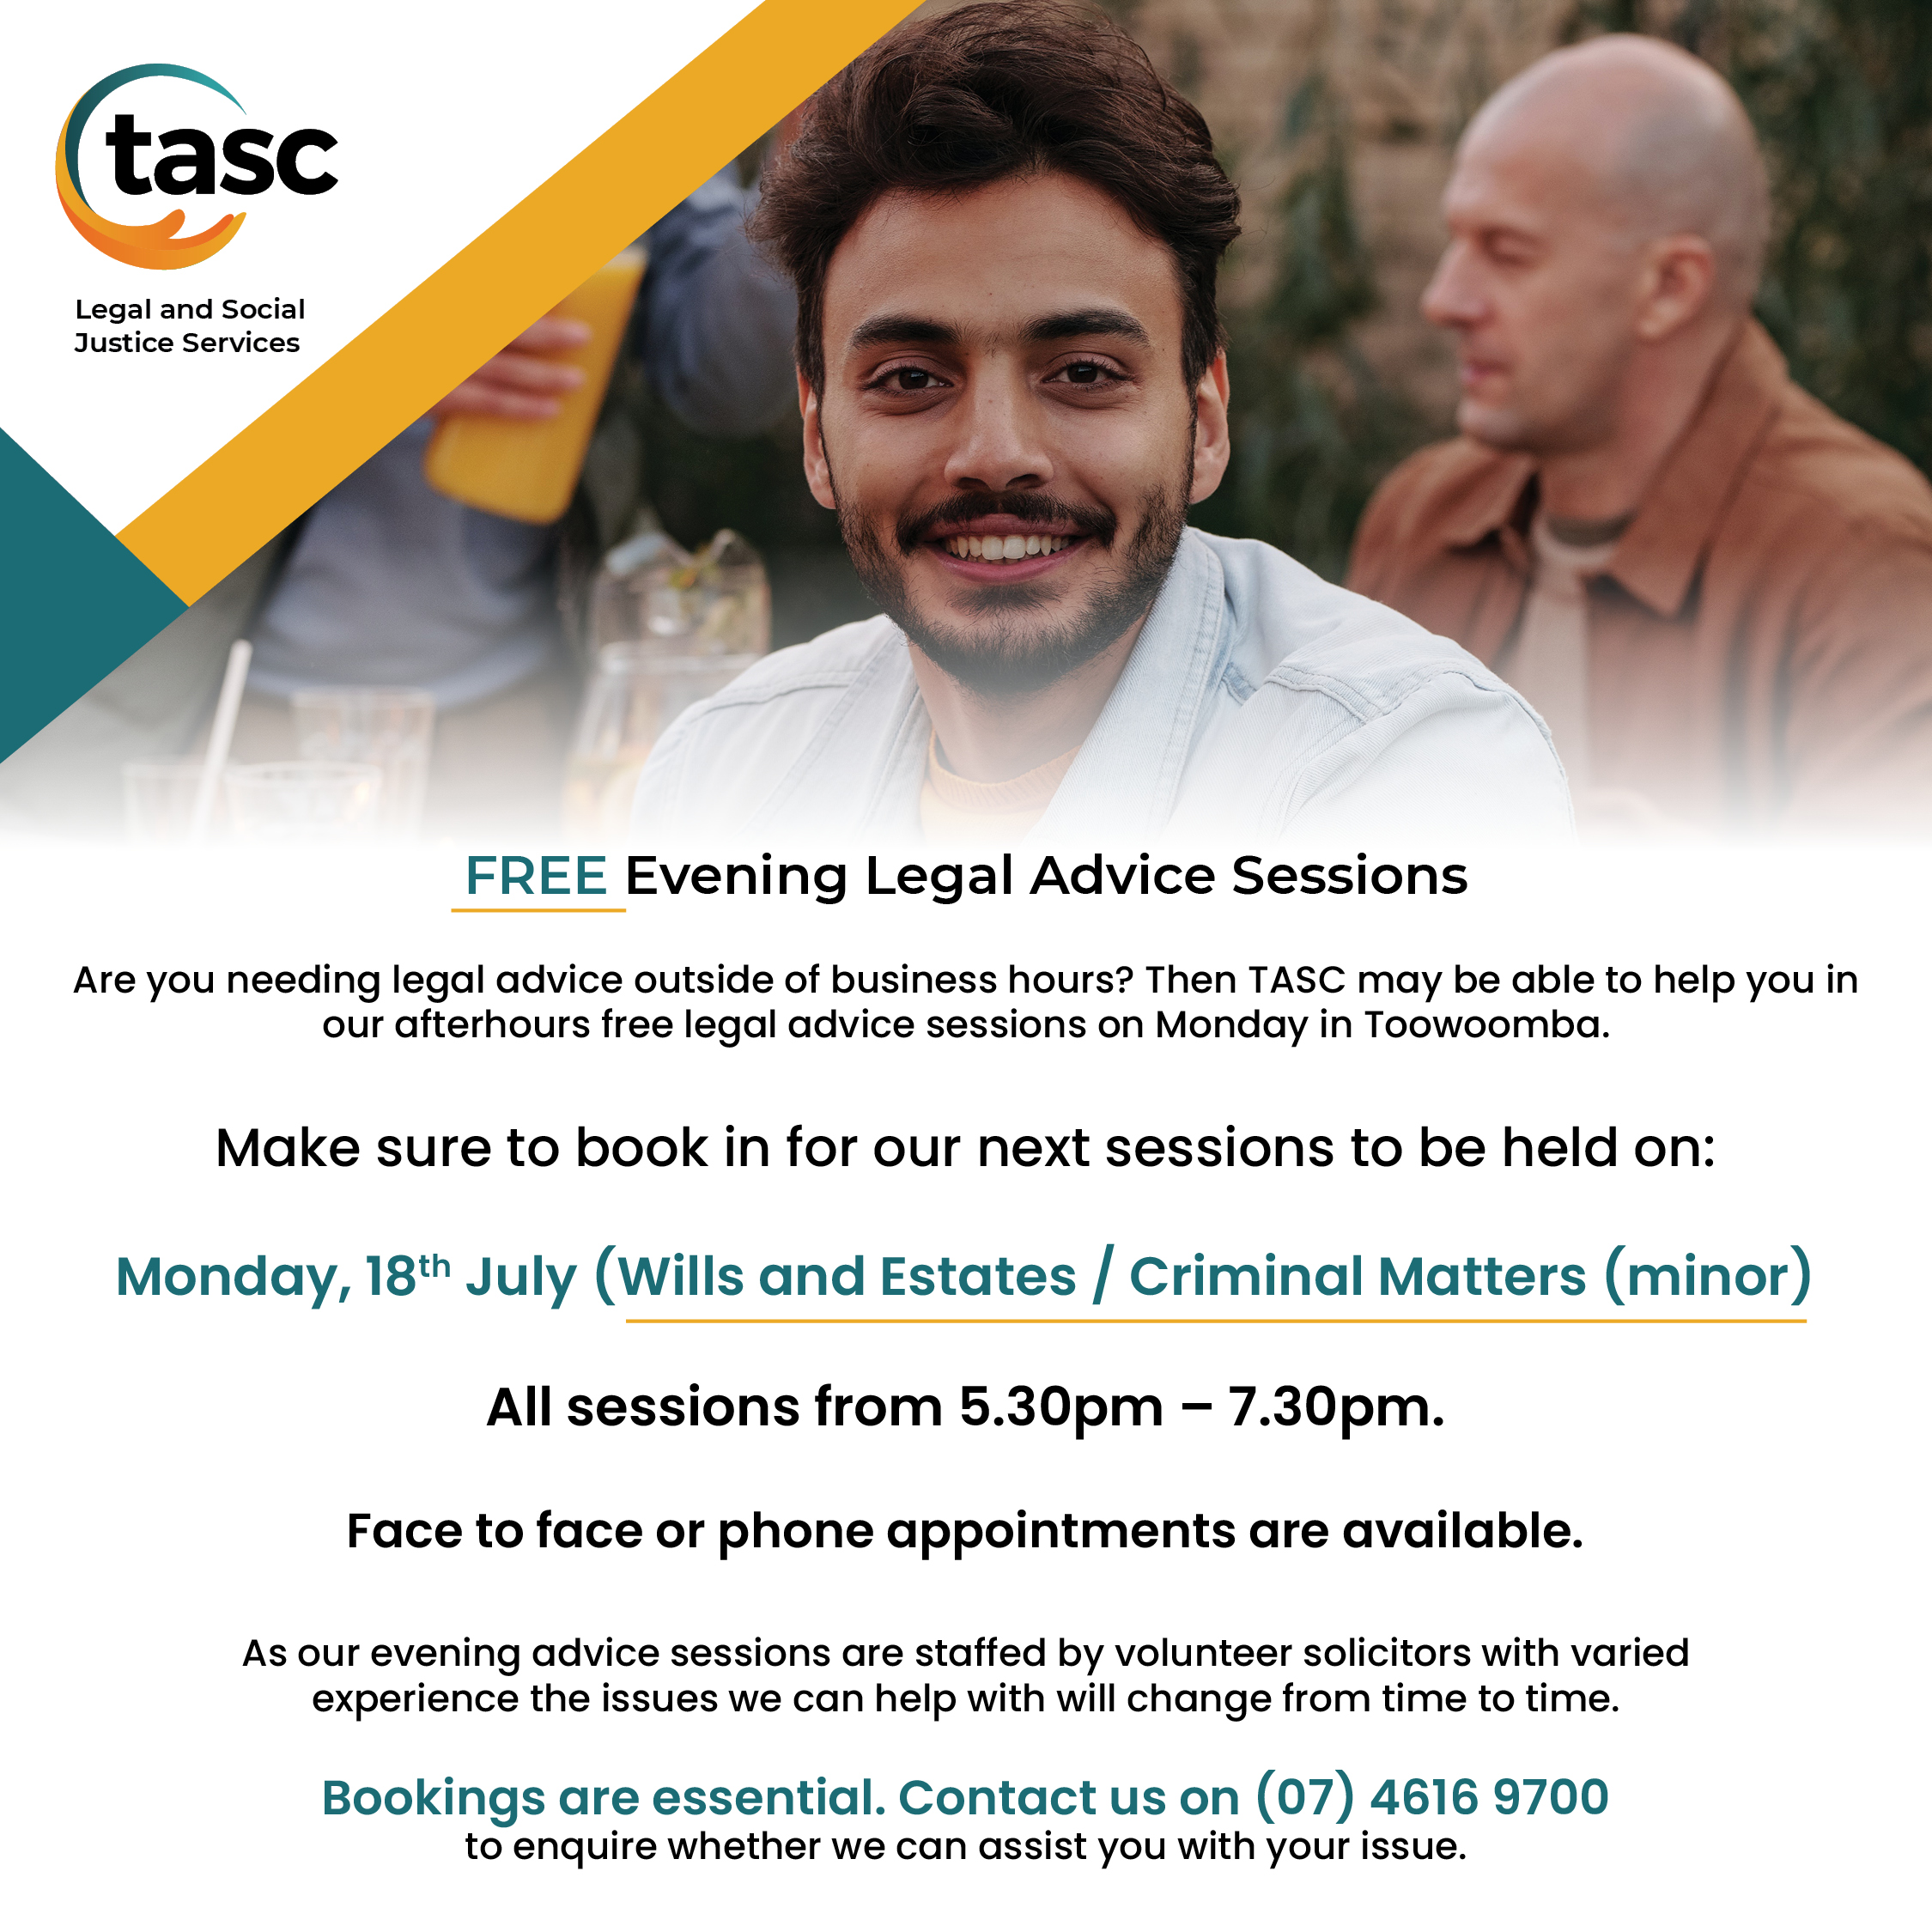 Free Evening Legal Advice Sessions – Wills and Estates / Criminal Matters (Minor) Monday, 18 July 2022